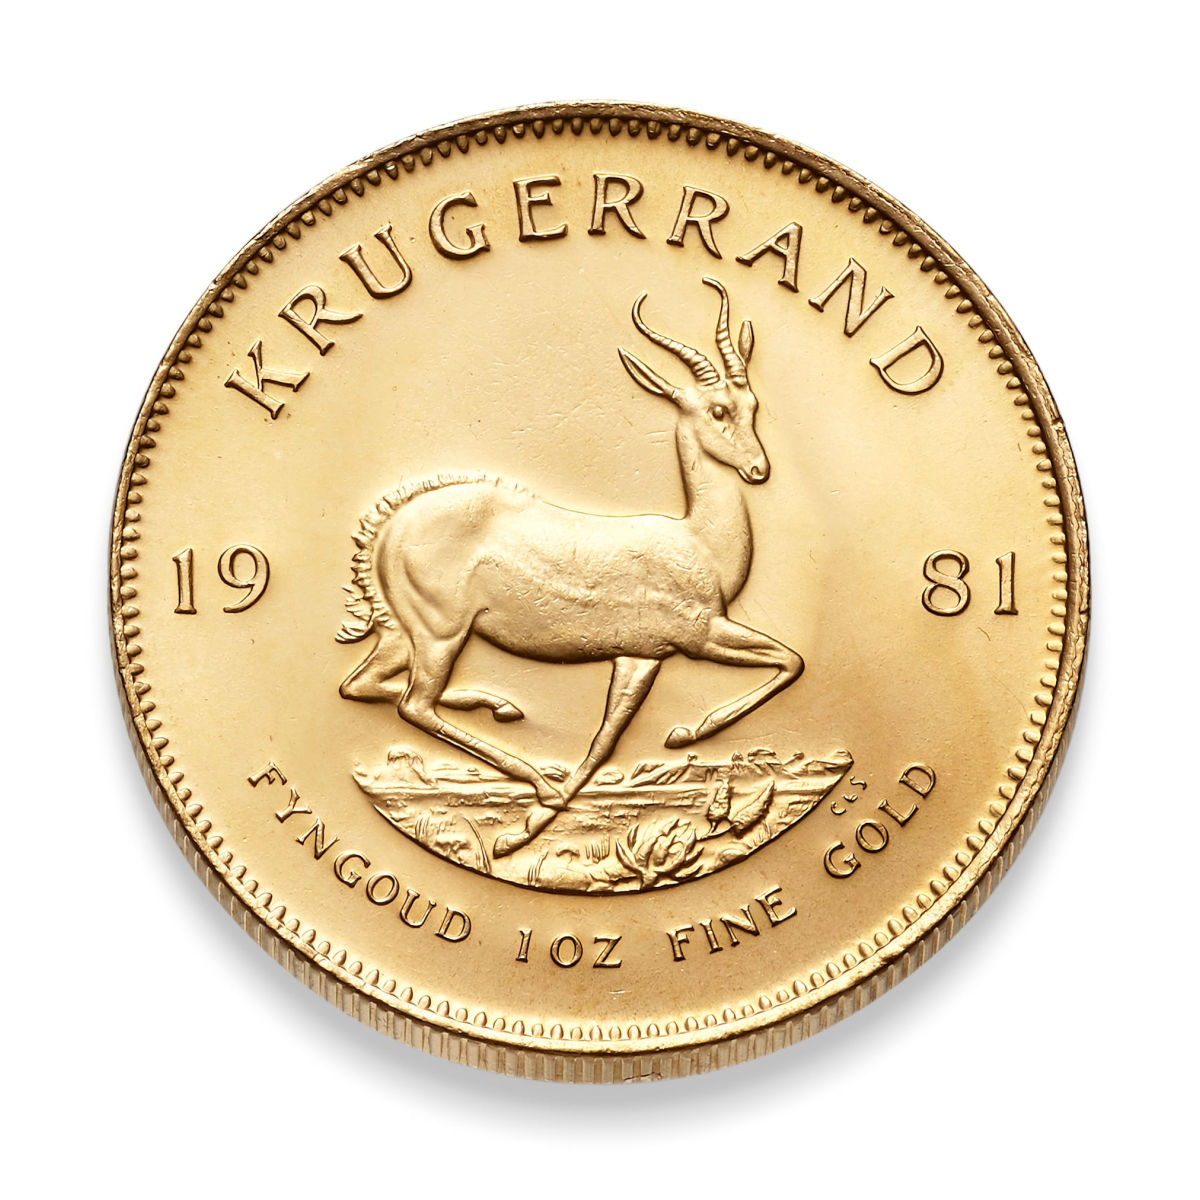 South African gold coin